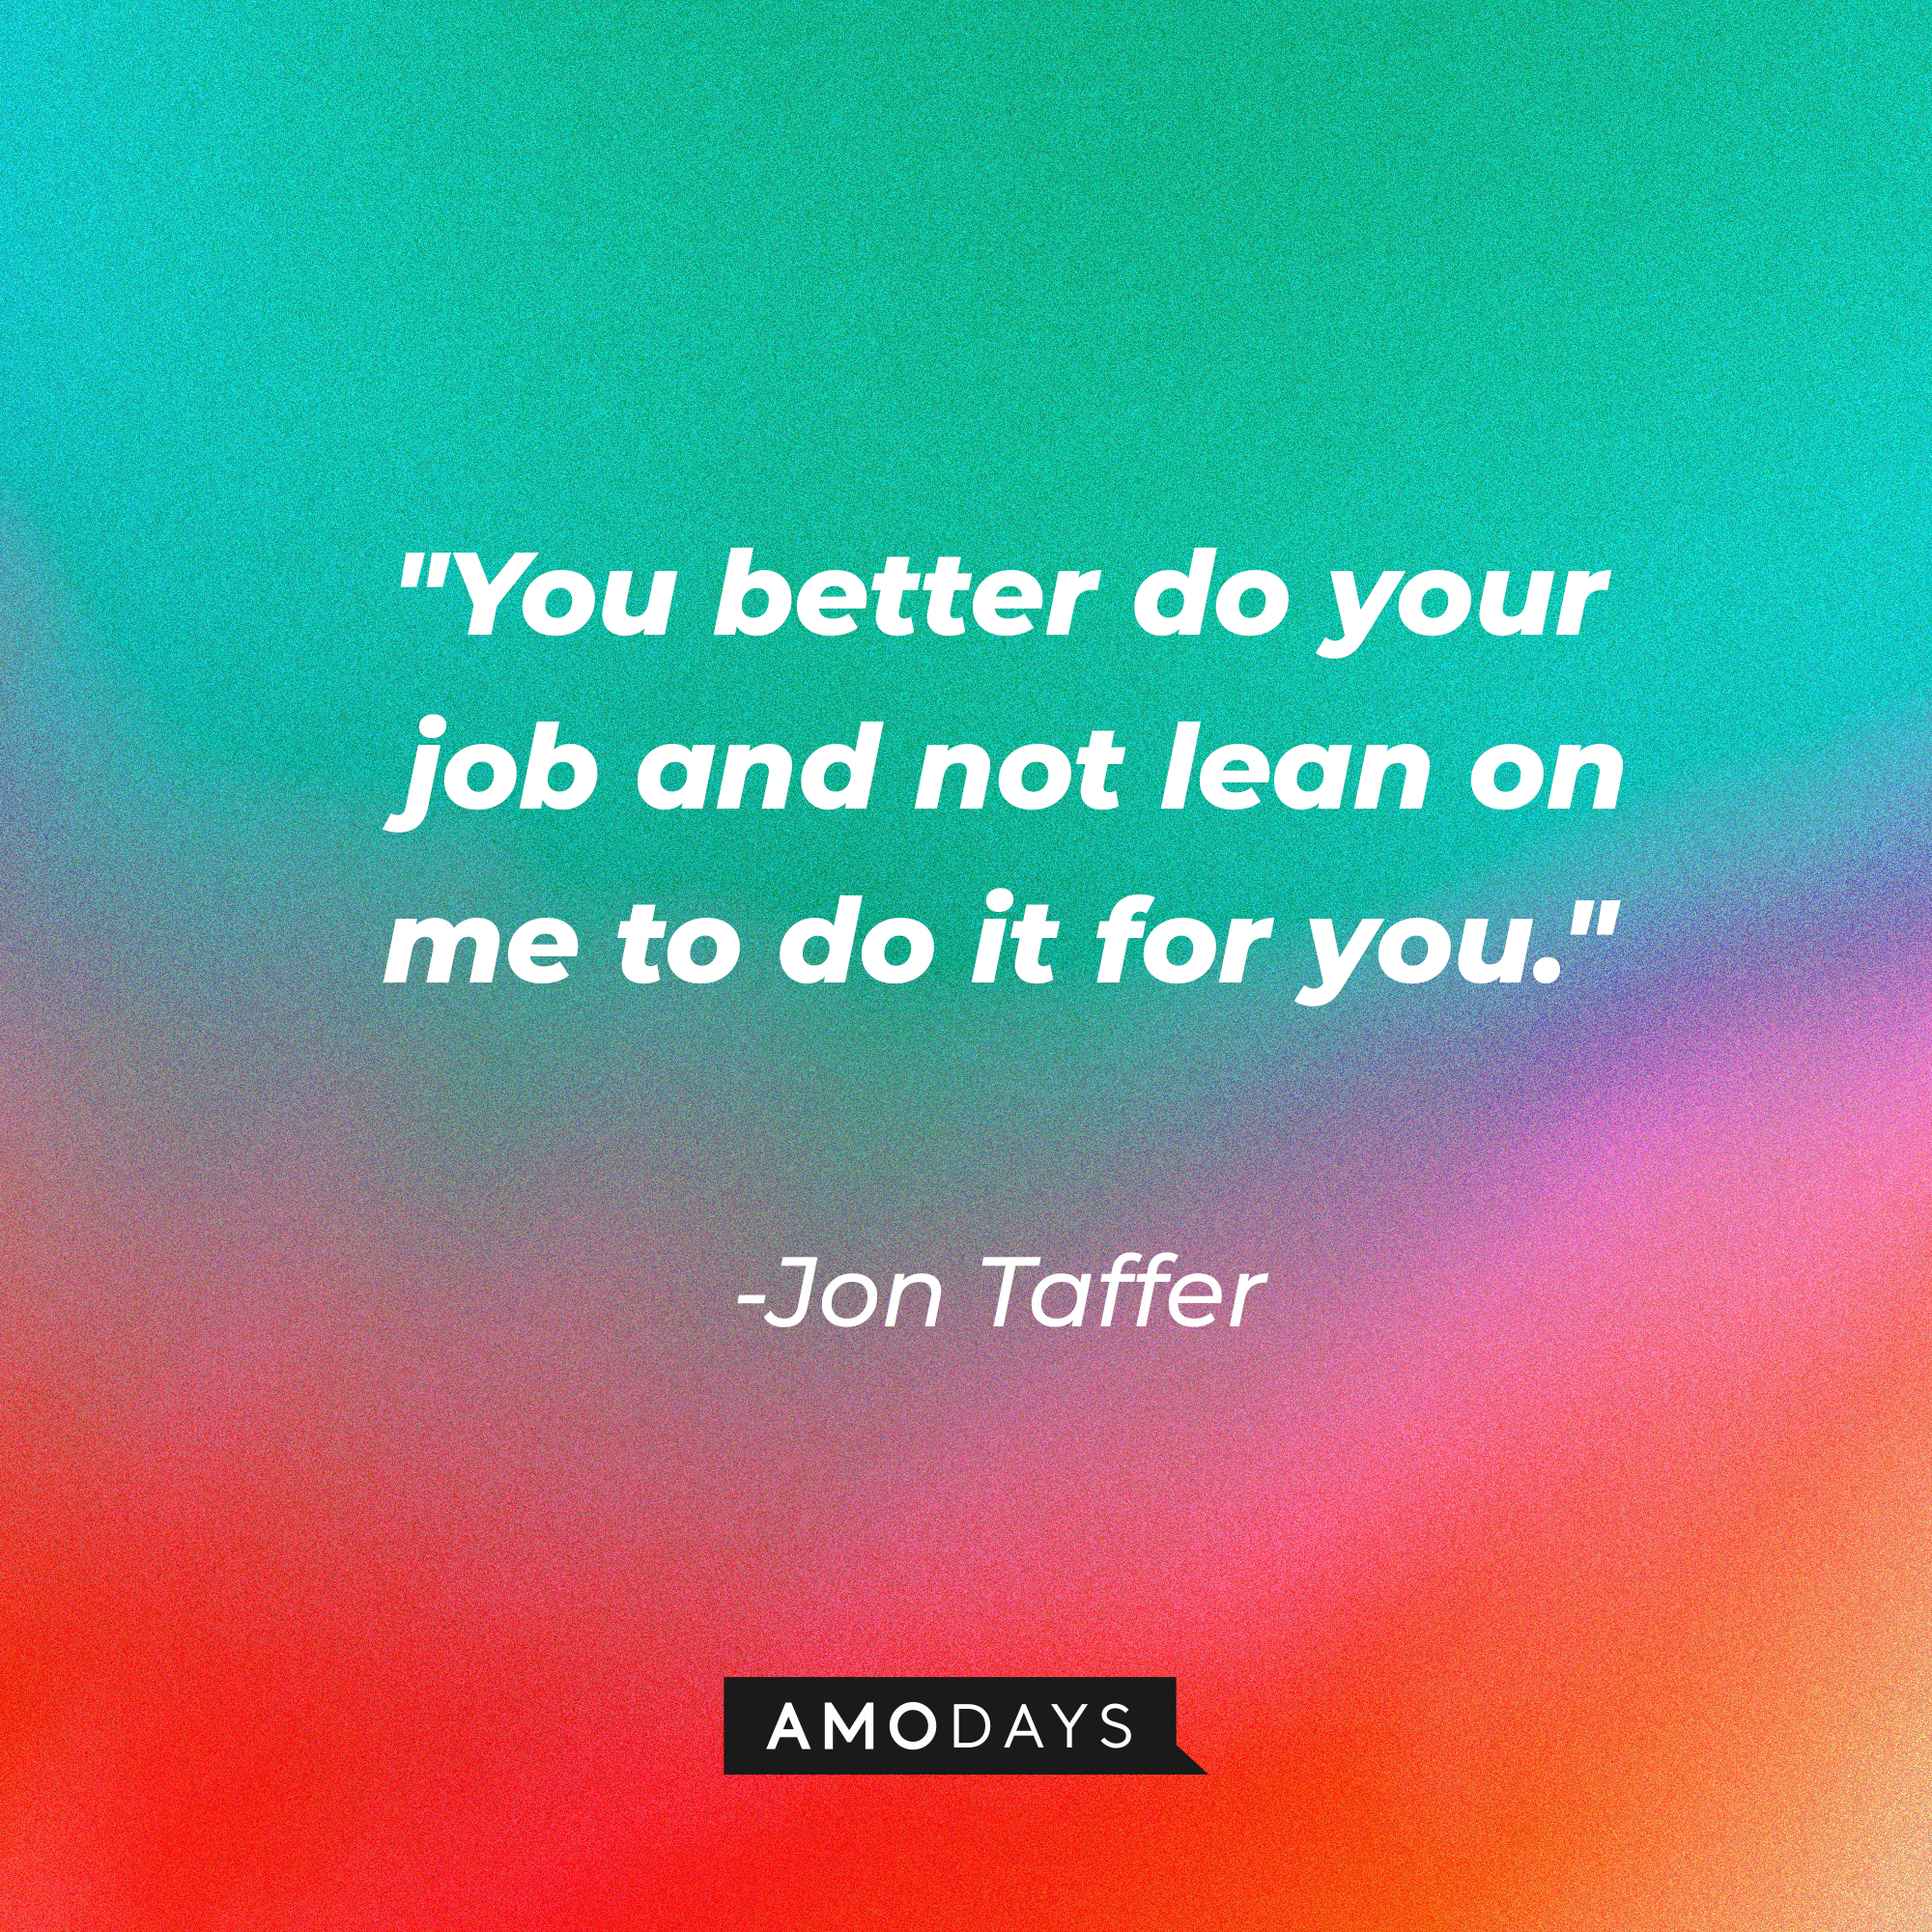 Jon Taffer's quote, "You better do your job and not lean on me to do it for you." | Image: AmoDays